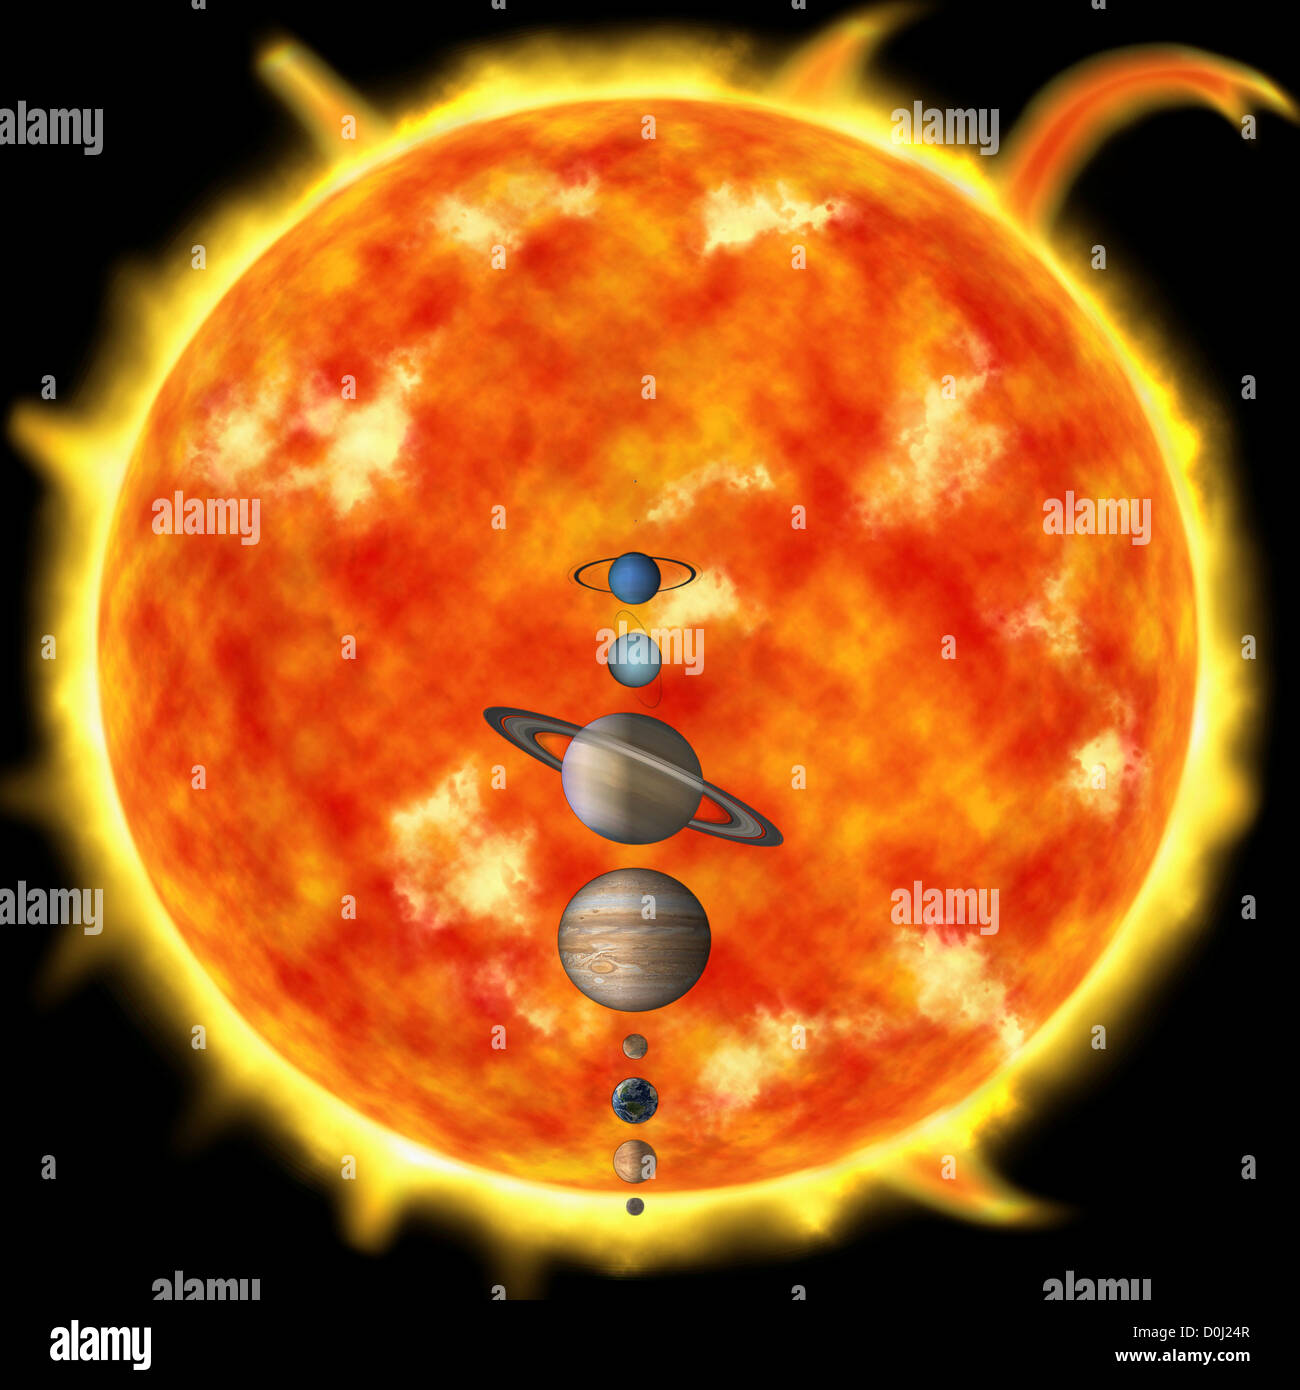 Digital Illustration of the Size of the Sun with the Planets of Our Solar System Stock Photo